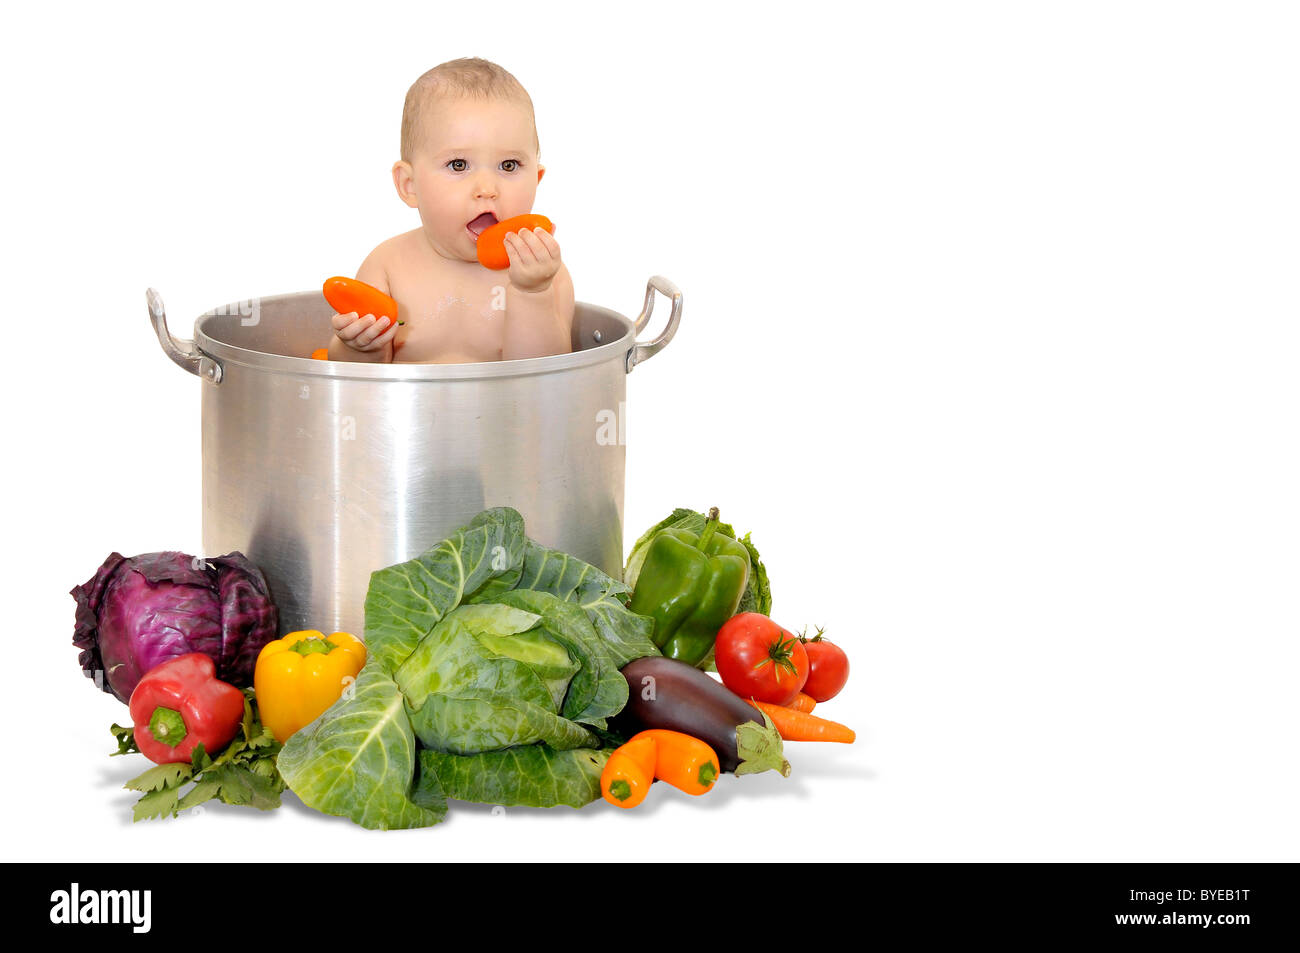 Beautiful young baby in a pan with vegetables Stock Photo